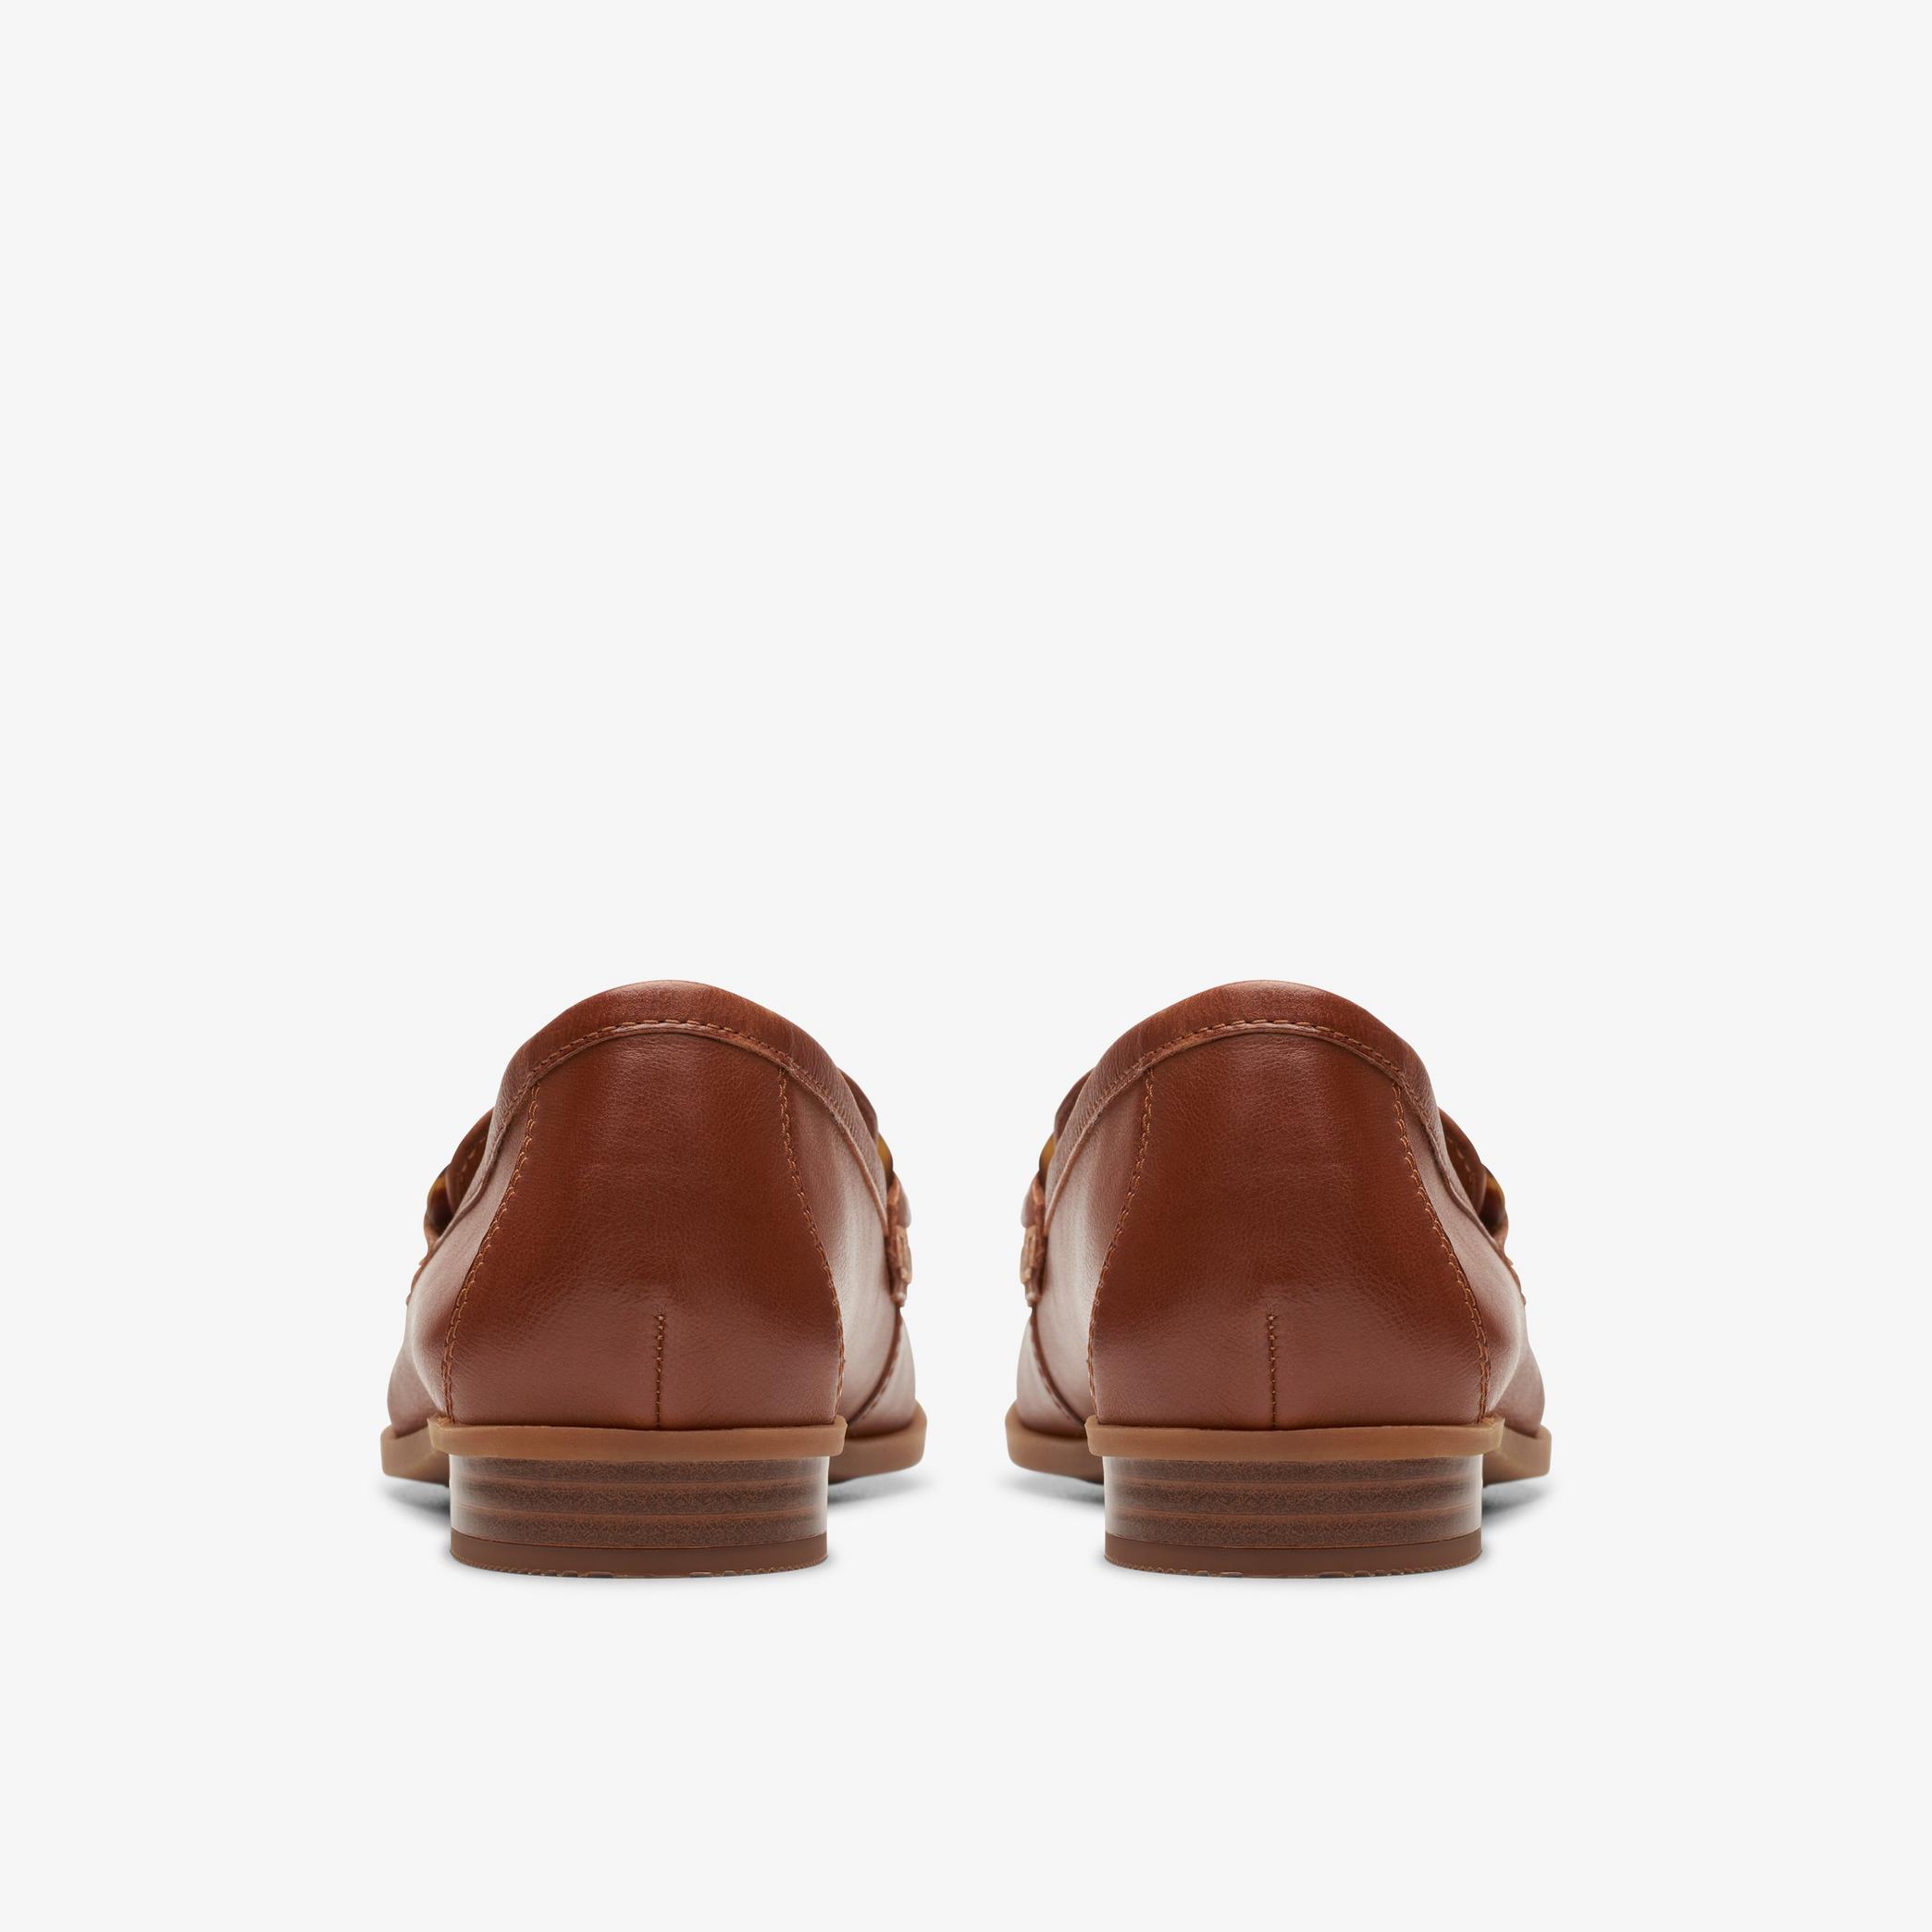 Sarafyna Iris Tan Leather Loafers, view 6 of 11